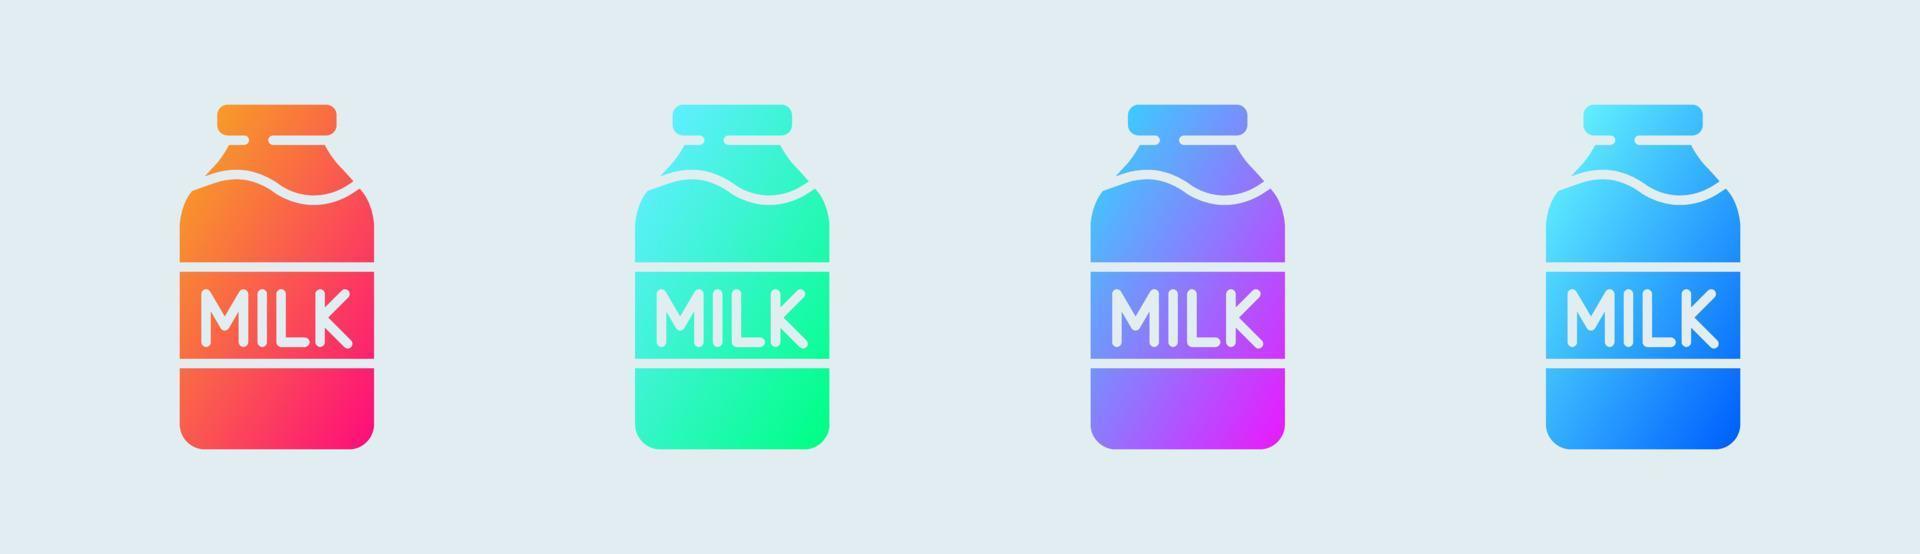 Milk solid icon in gradient colors. Drink signs vector illustration.